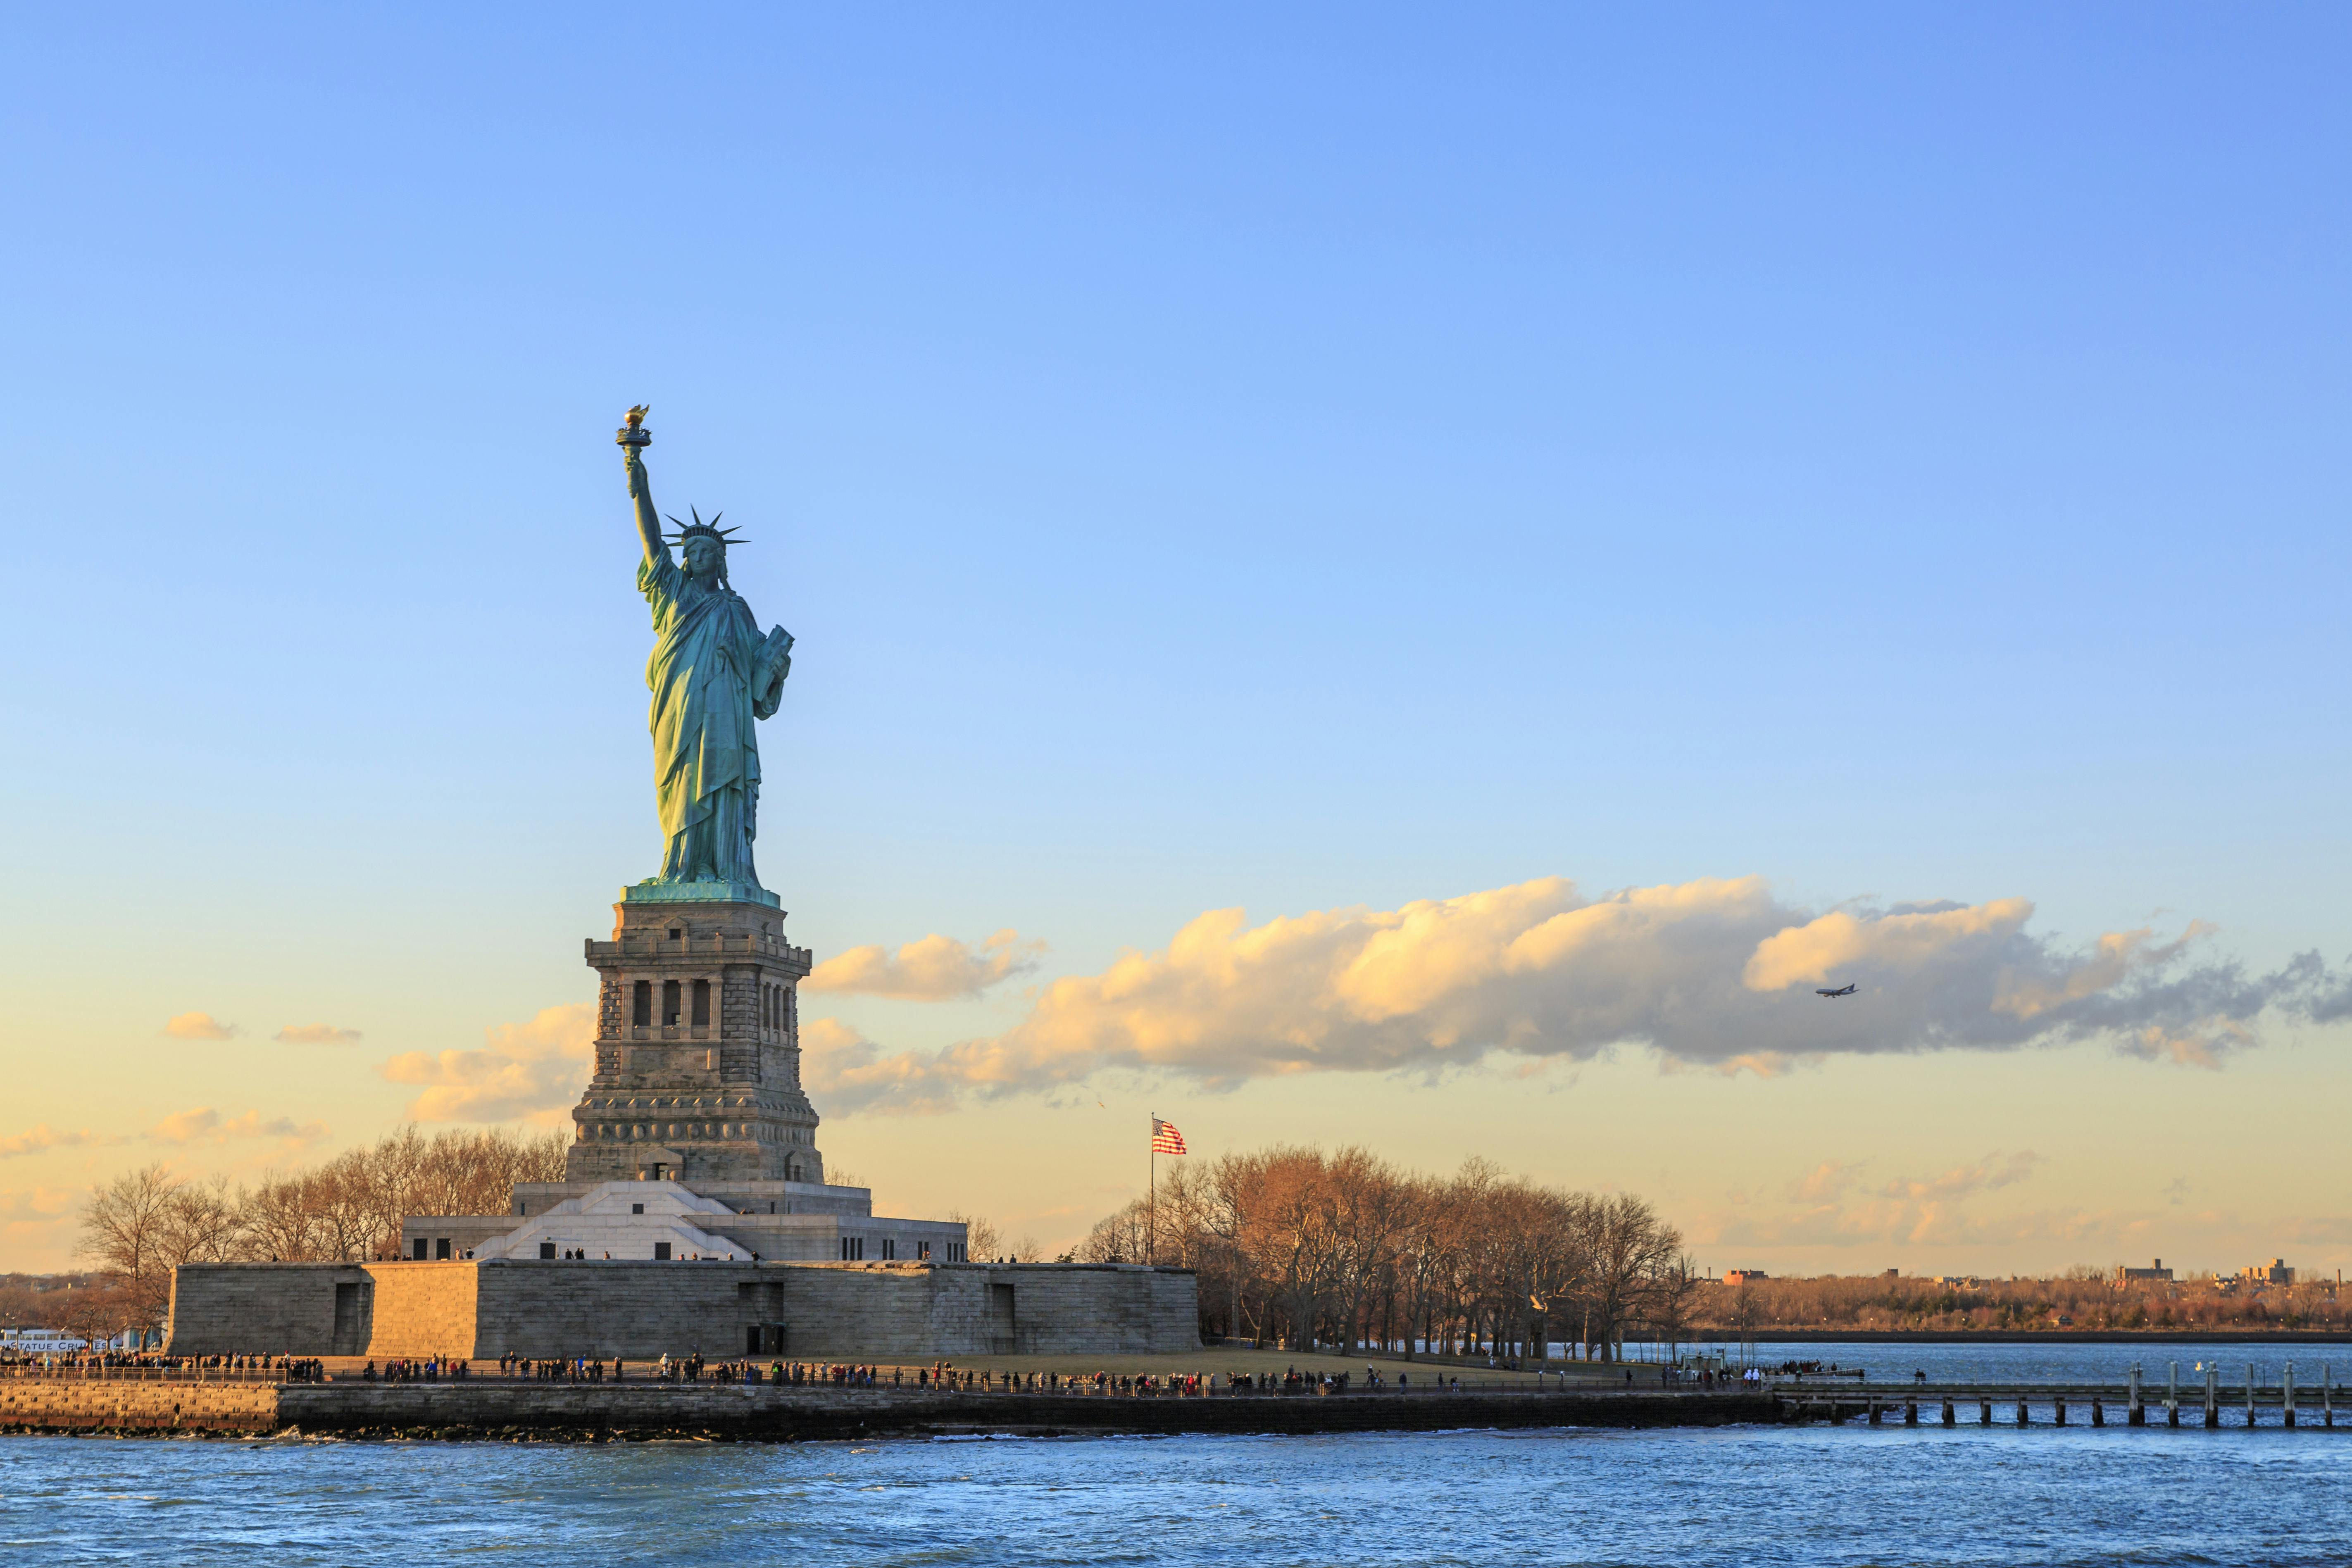 Private guided tour of the Statue of Liberty and Ellis Island